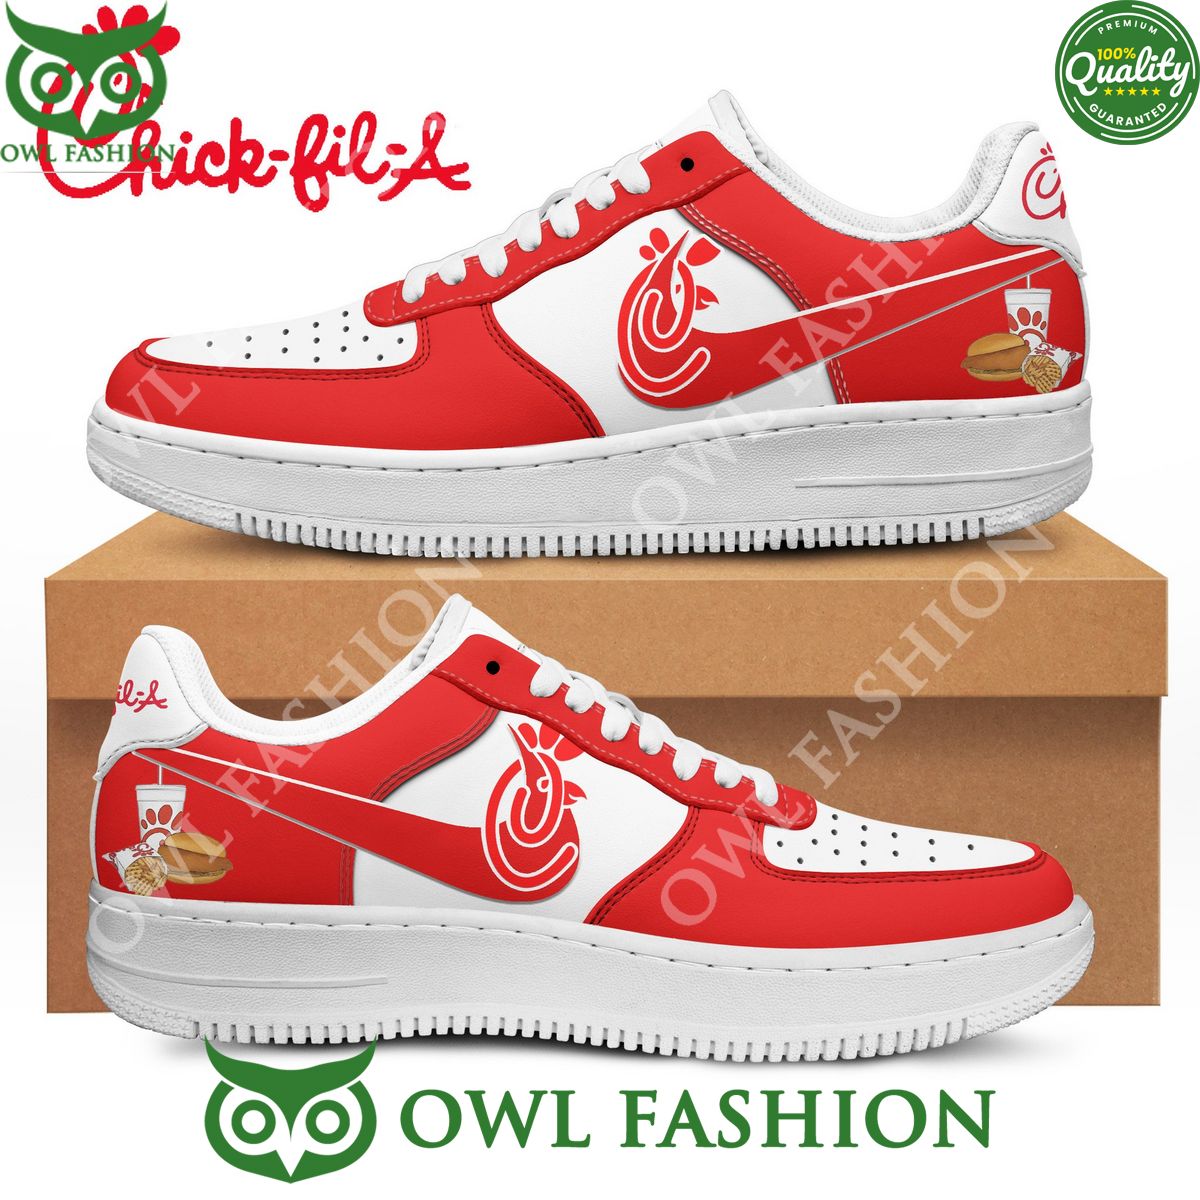 chick fil a chicken sandwiches red air force shoes 1 UlJTk.jpg